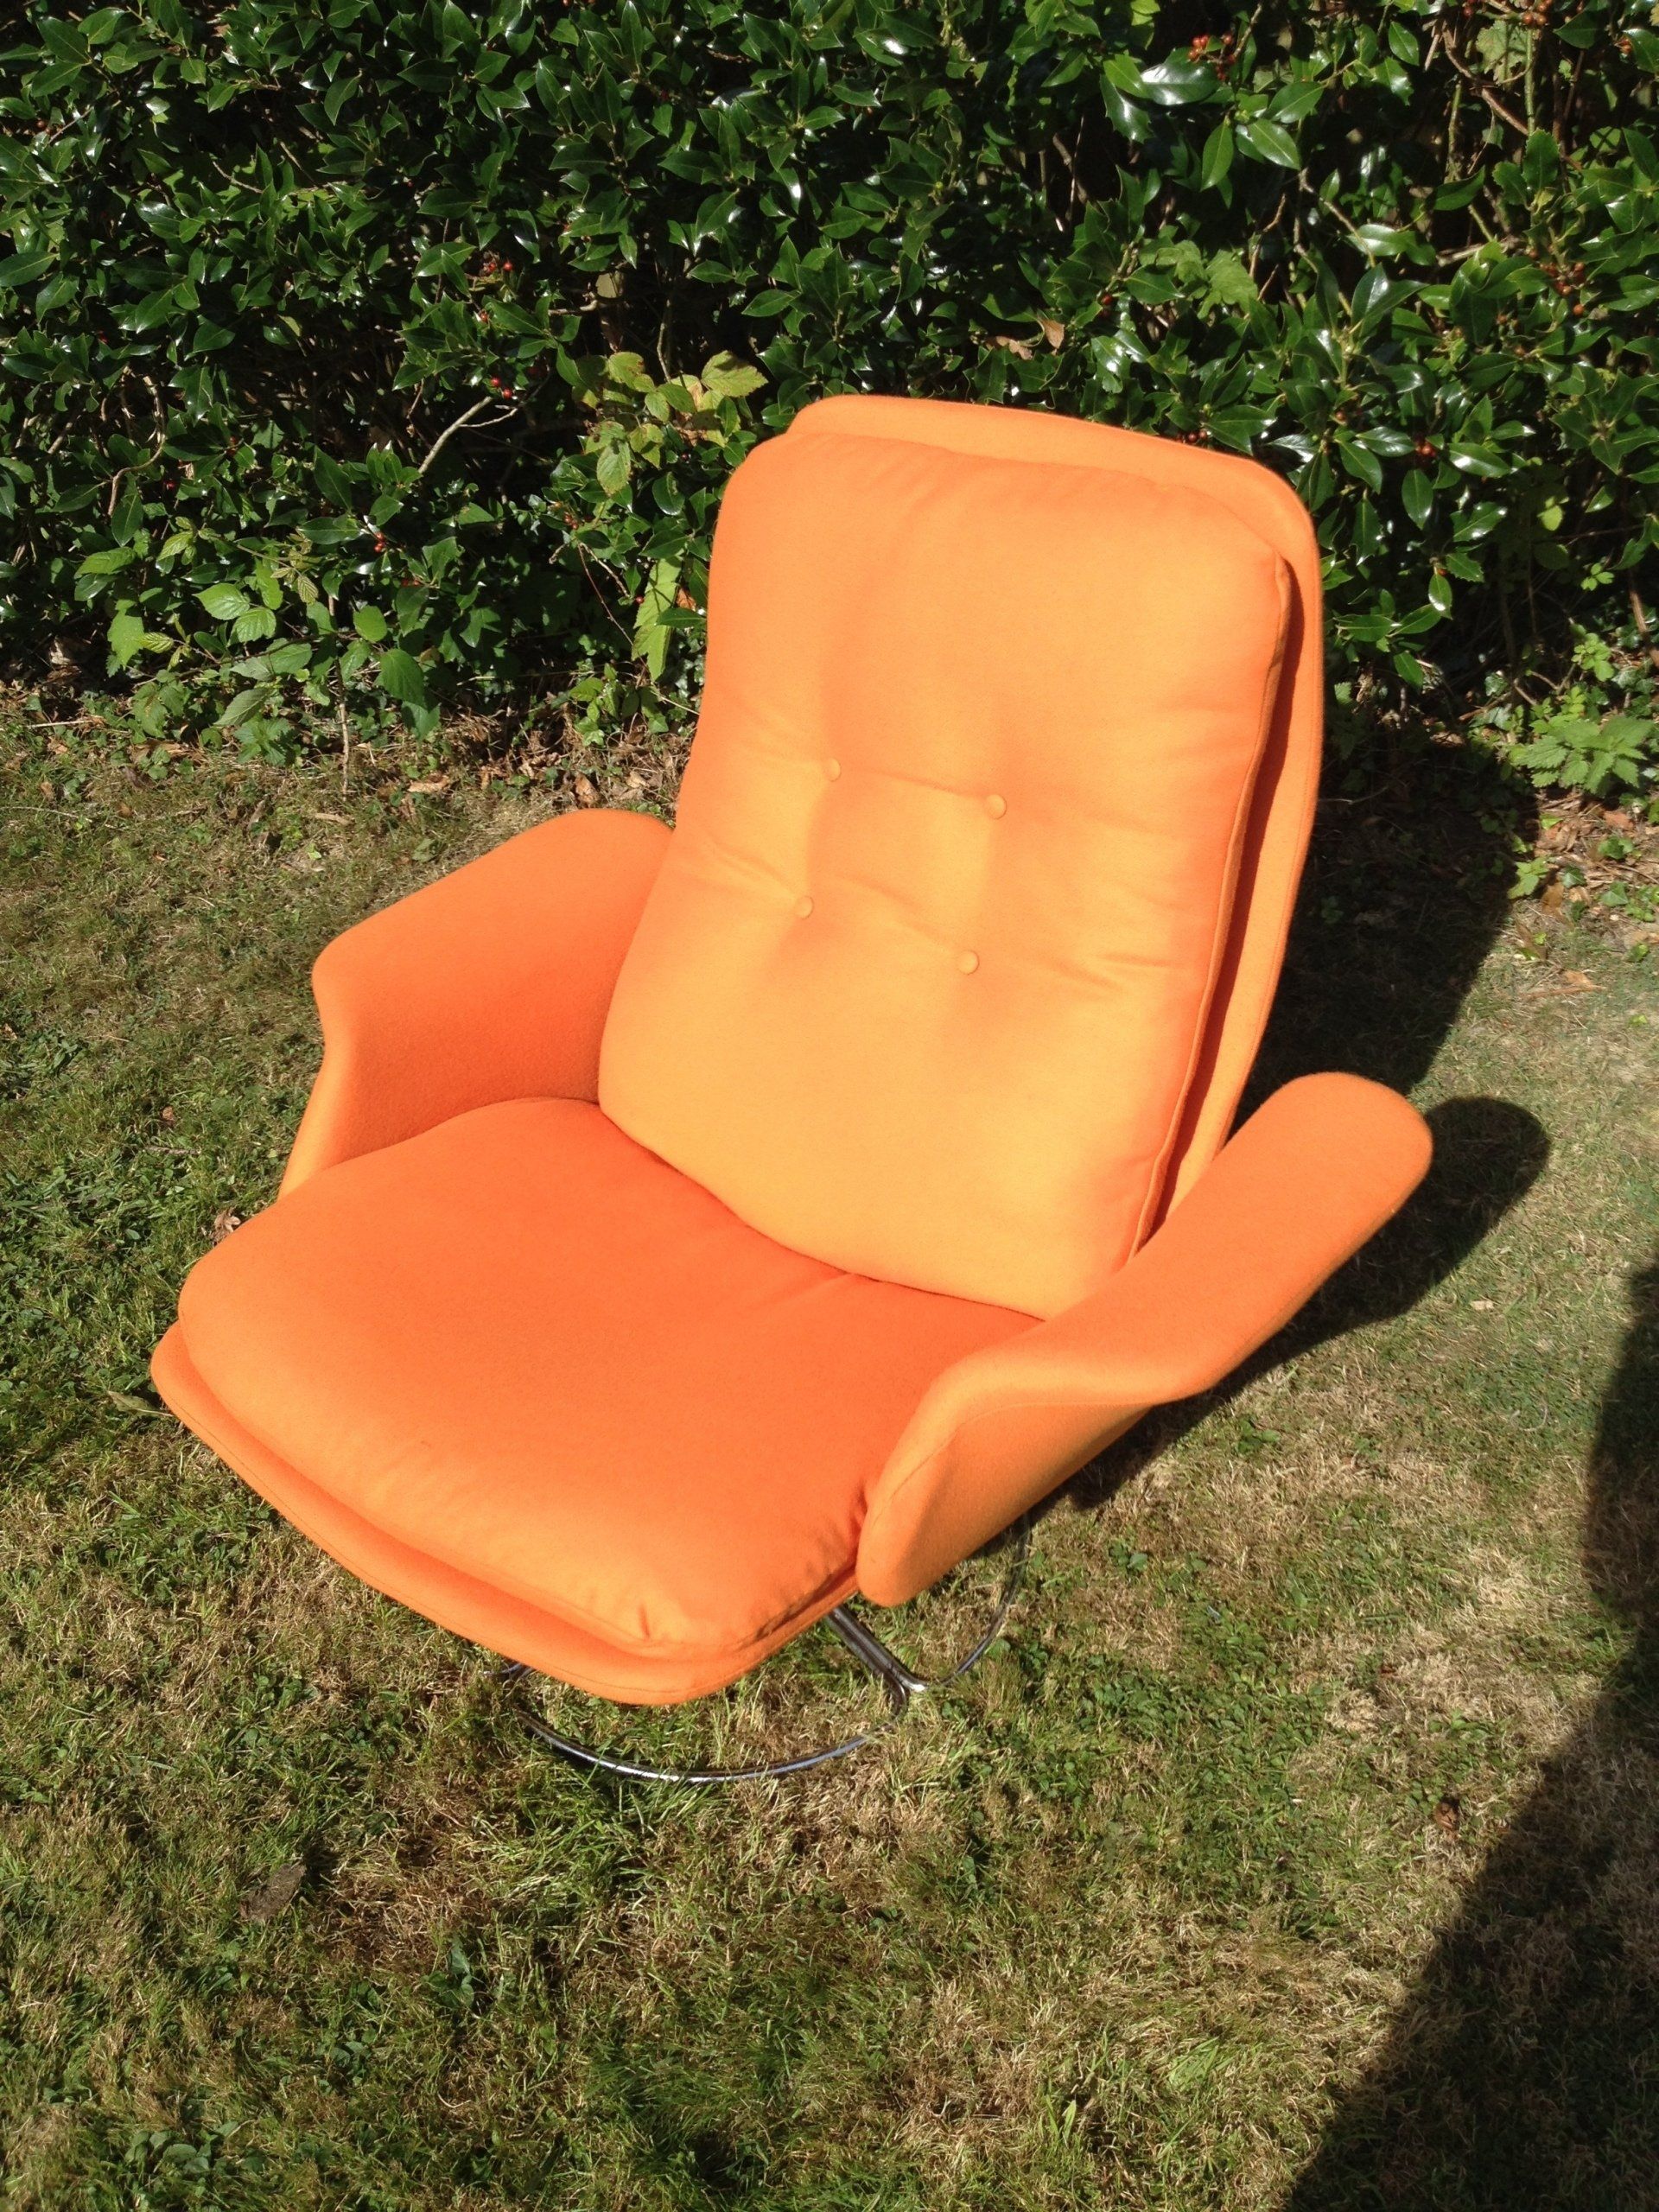 1970S VINTAGE RETRO SWIVELCHAIR WITH CHROME FOOT